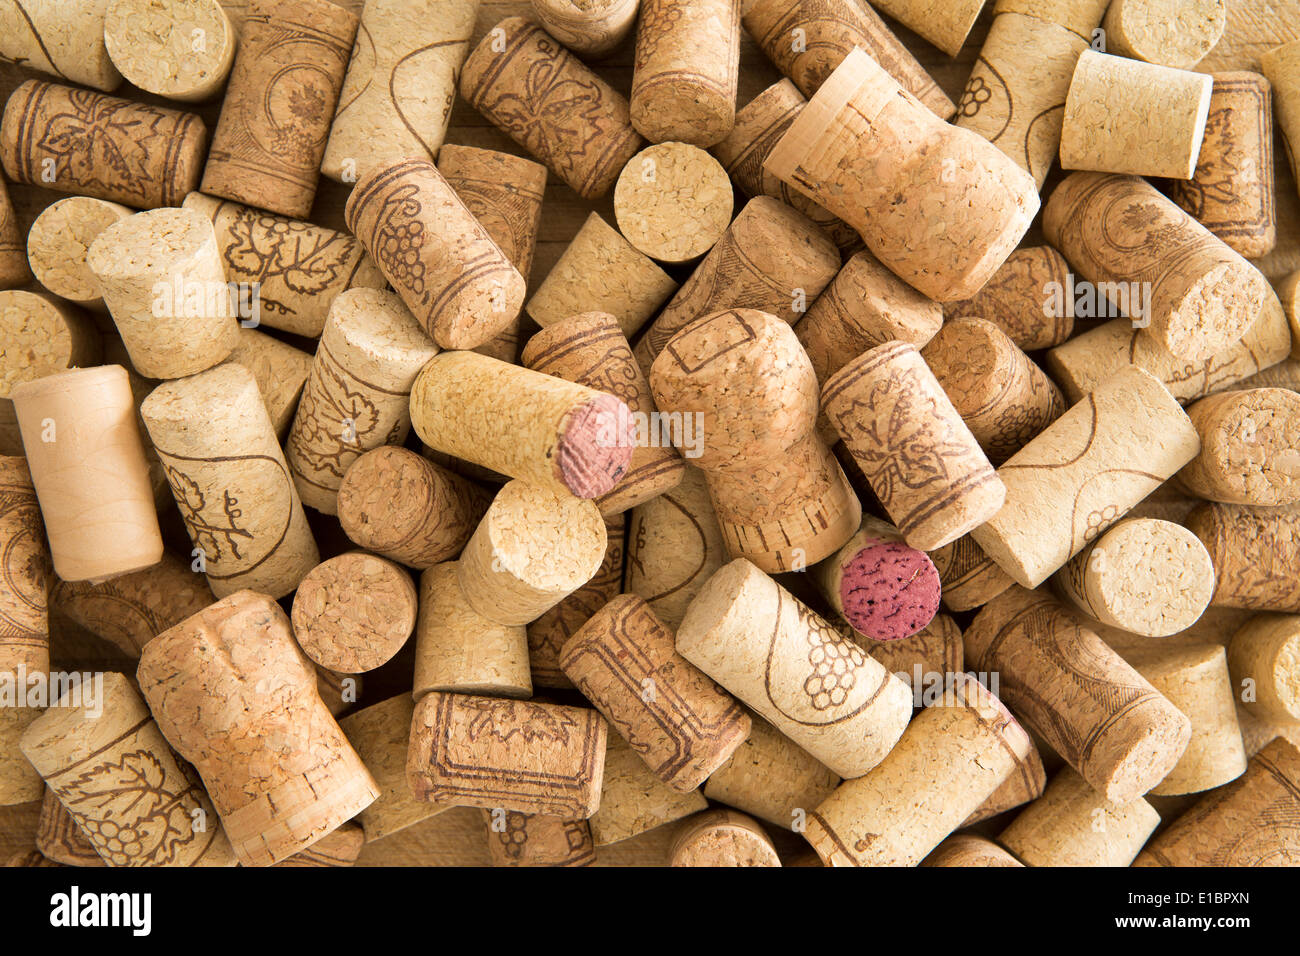 Background texture of a randomly scattered pile of assorted used wine corks with cultivar and winery details on the surface of t Stock Photo